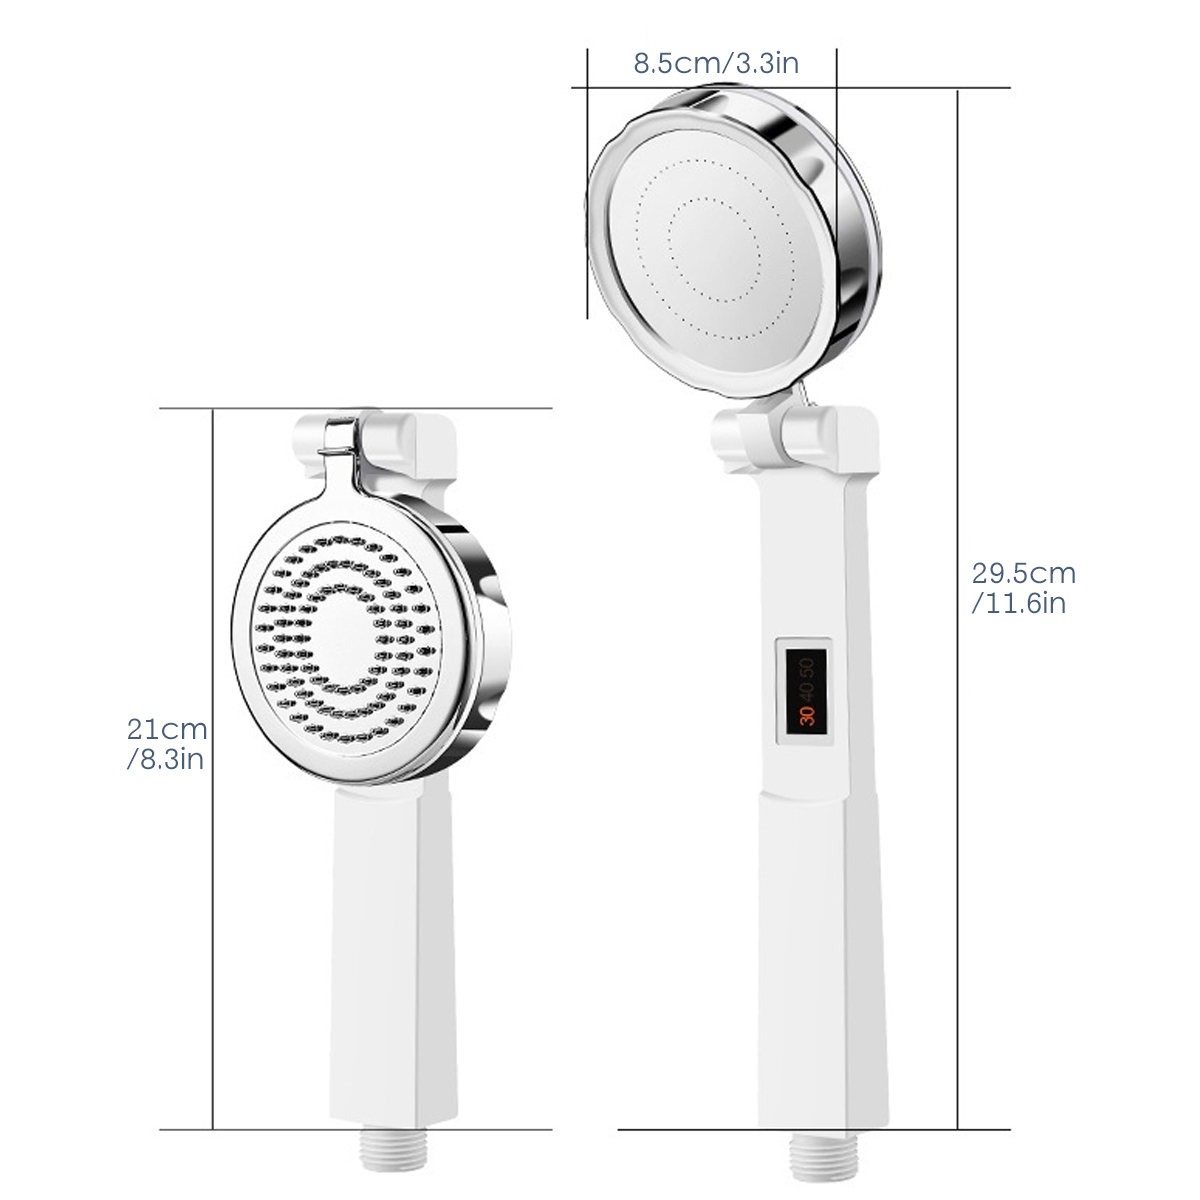 2-PCS-Digital-Shower-Head-Clamshell-Hand-Held-Pressurized-Back-Cover-Rubbing-3-Level-Temperature-Dis-1963145-6